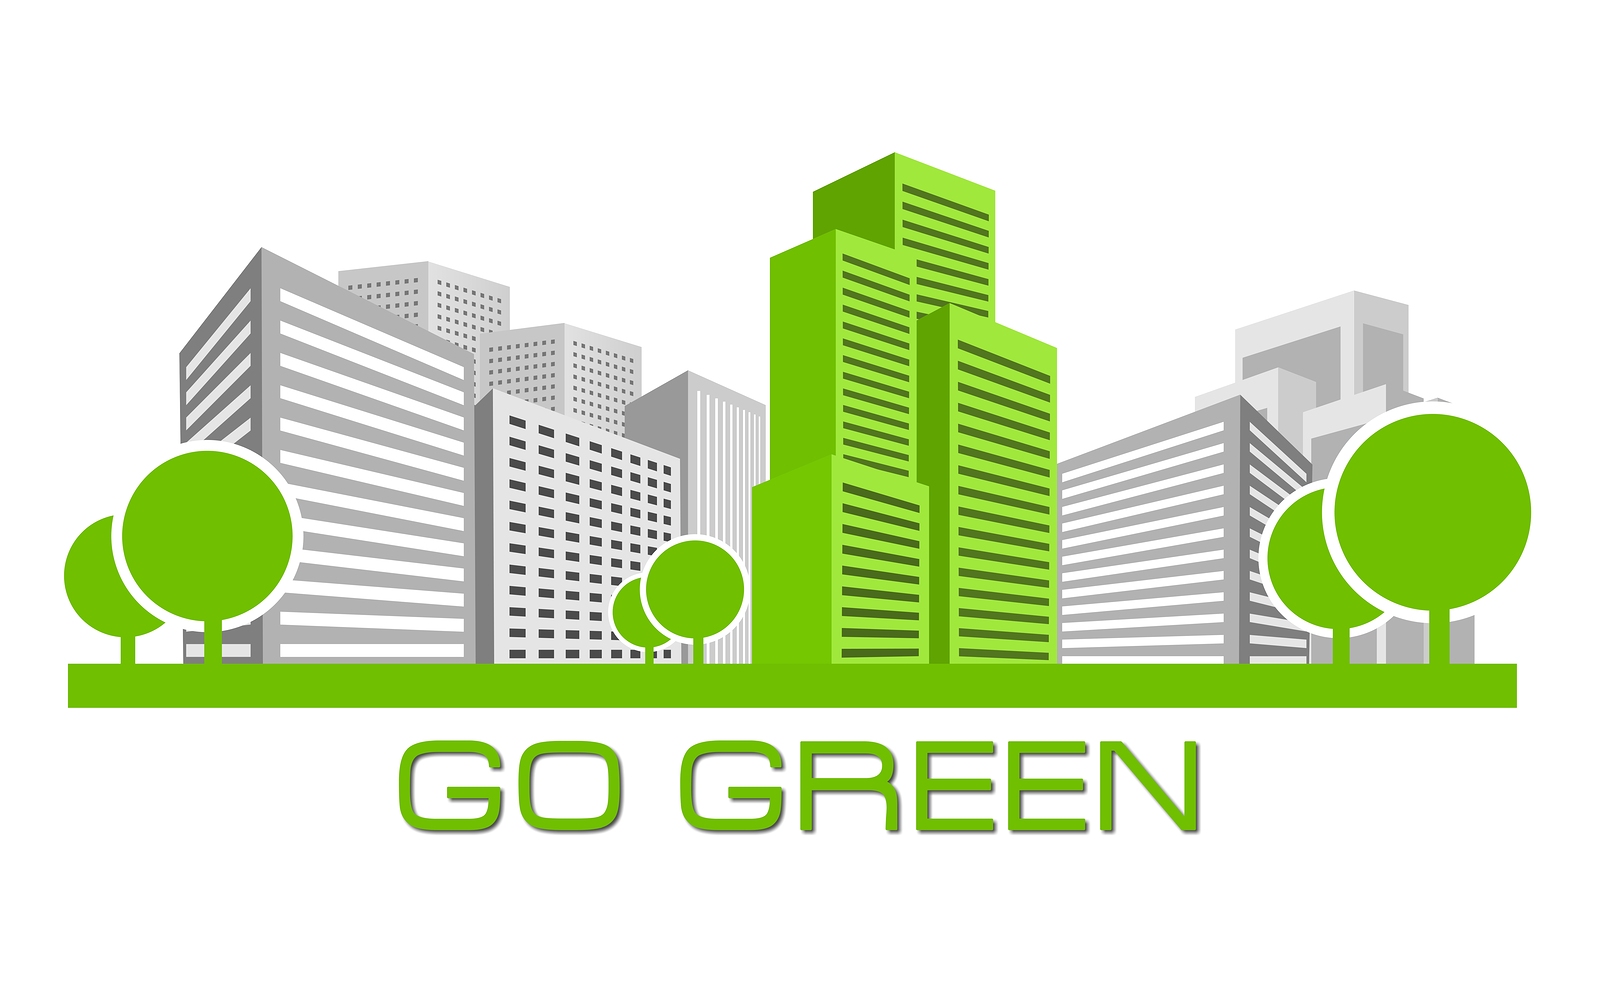 Go green building for Jean-Luc Andriot blog 042018